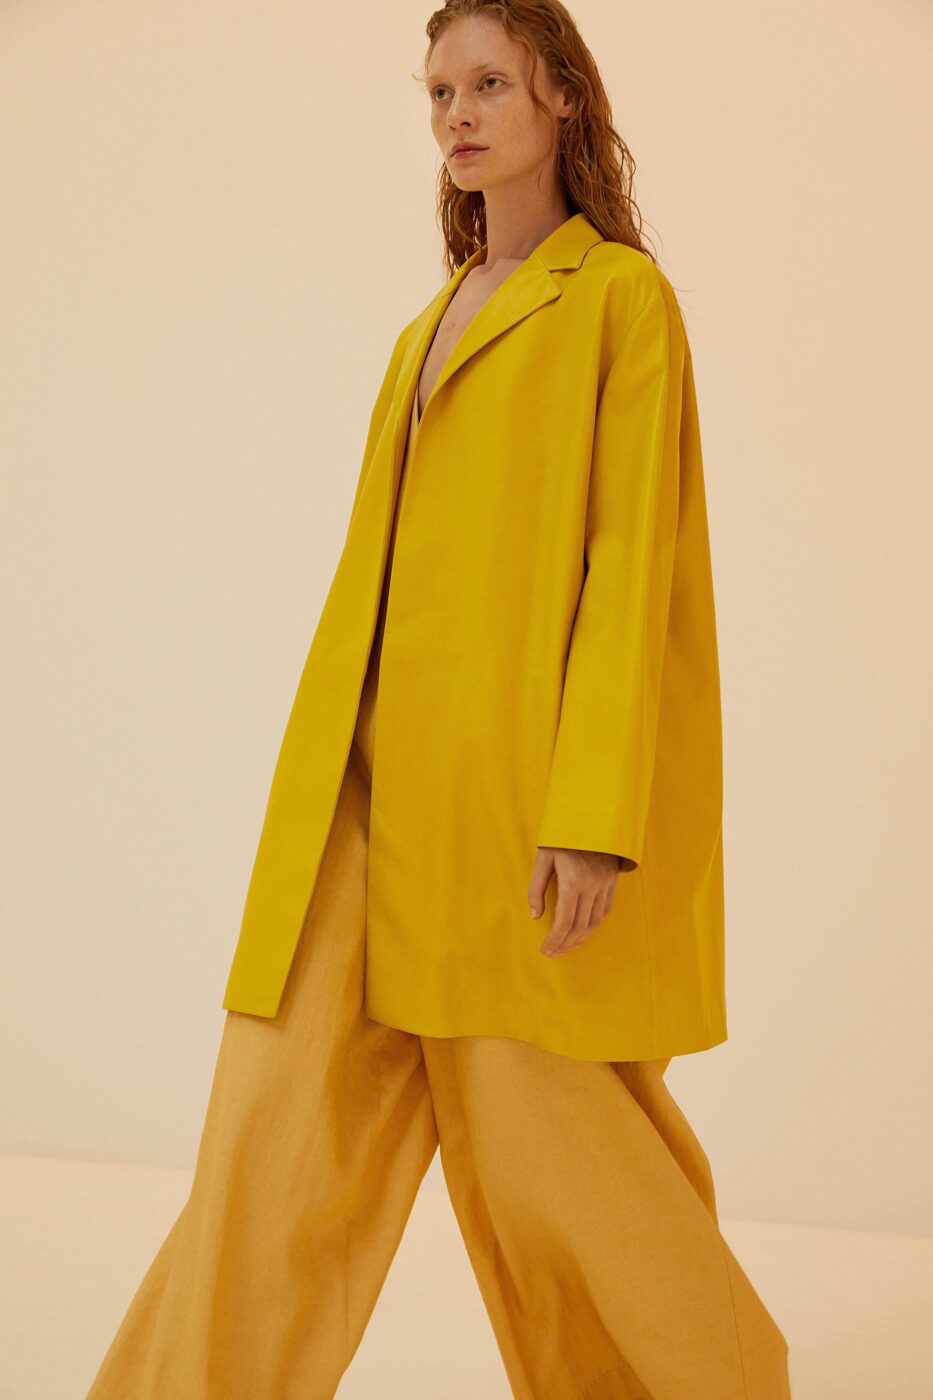 Theory Spring 2019 RTW Collection | LES FAÇONS